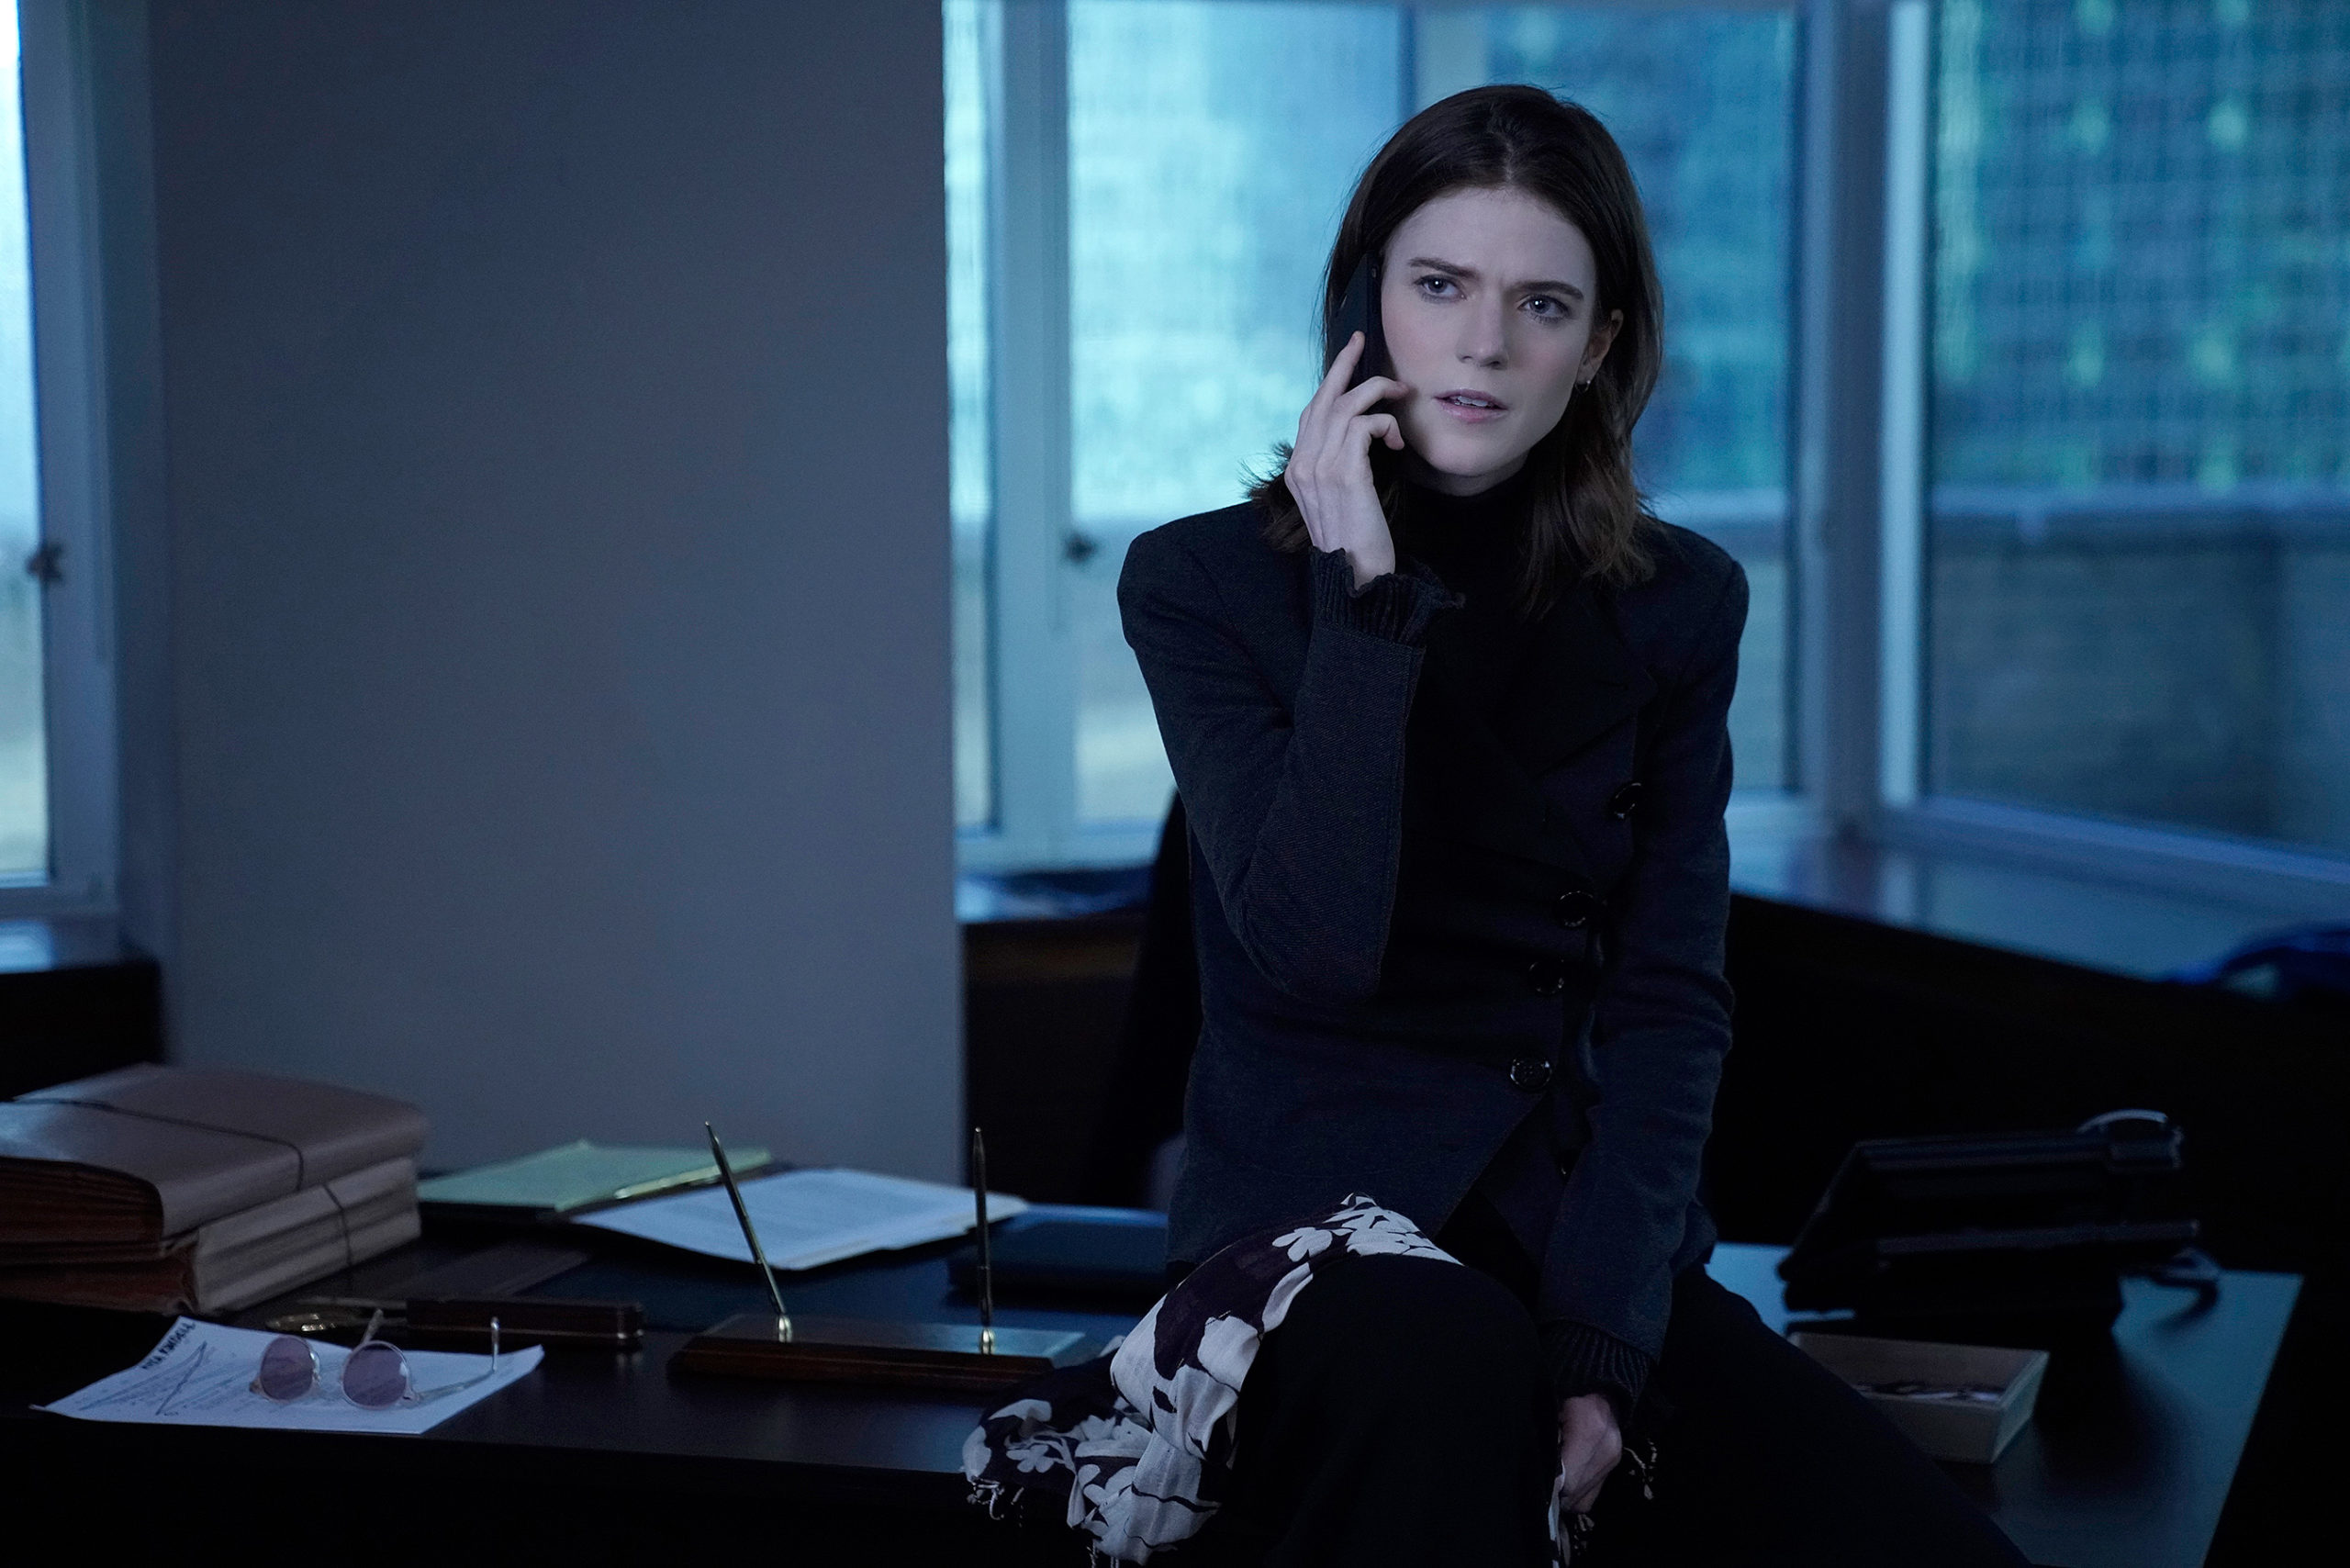 The good fight season 3, episode 9: "the one where the sun comes out" rose leslie